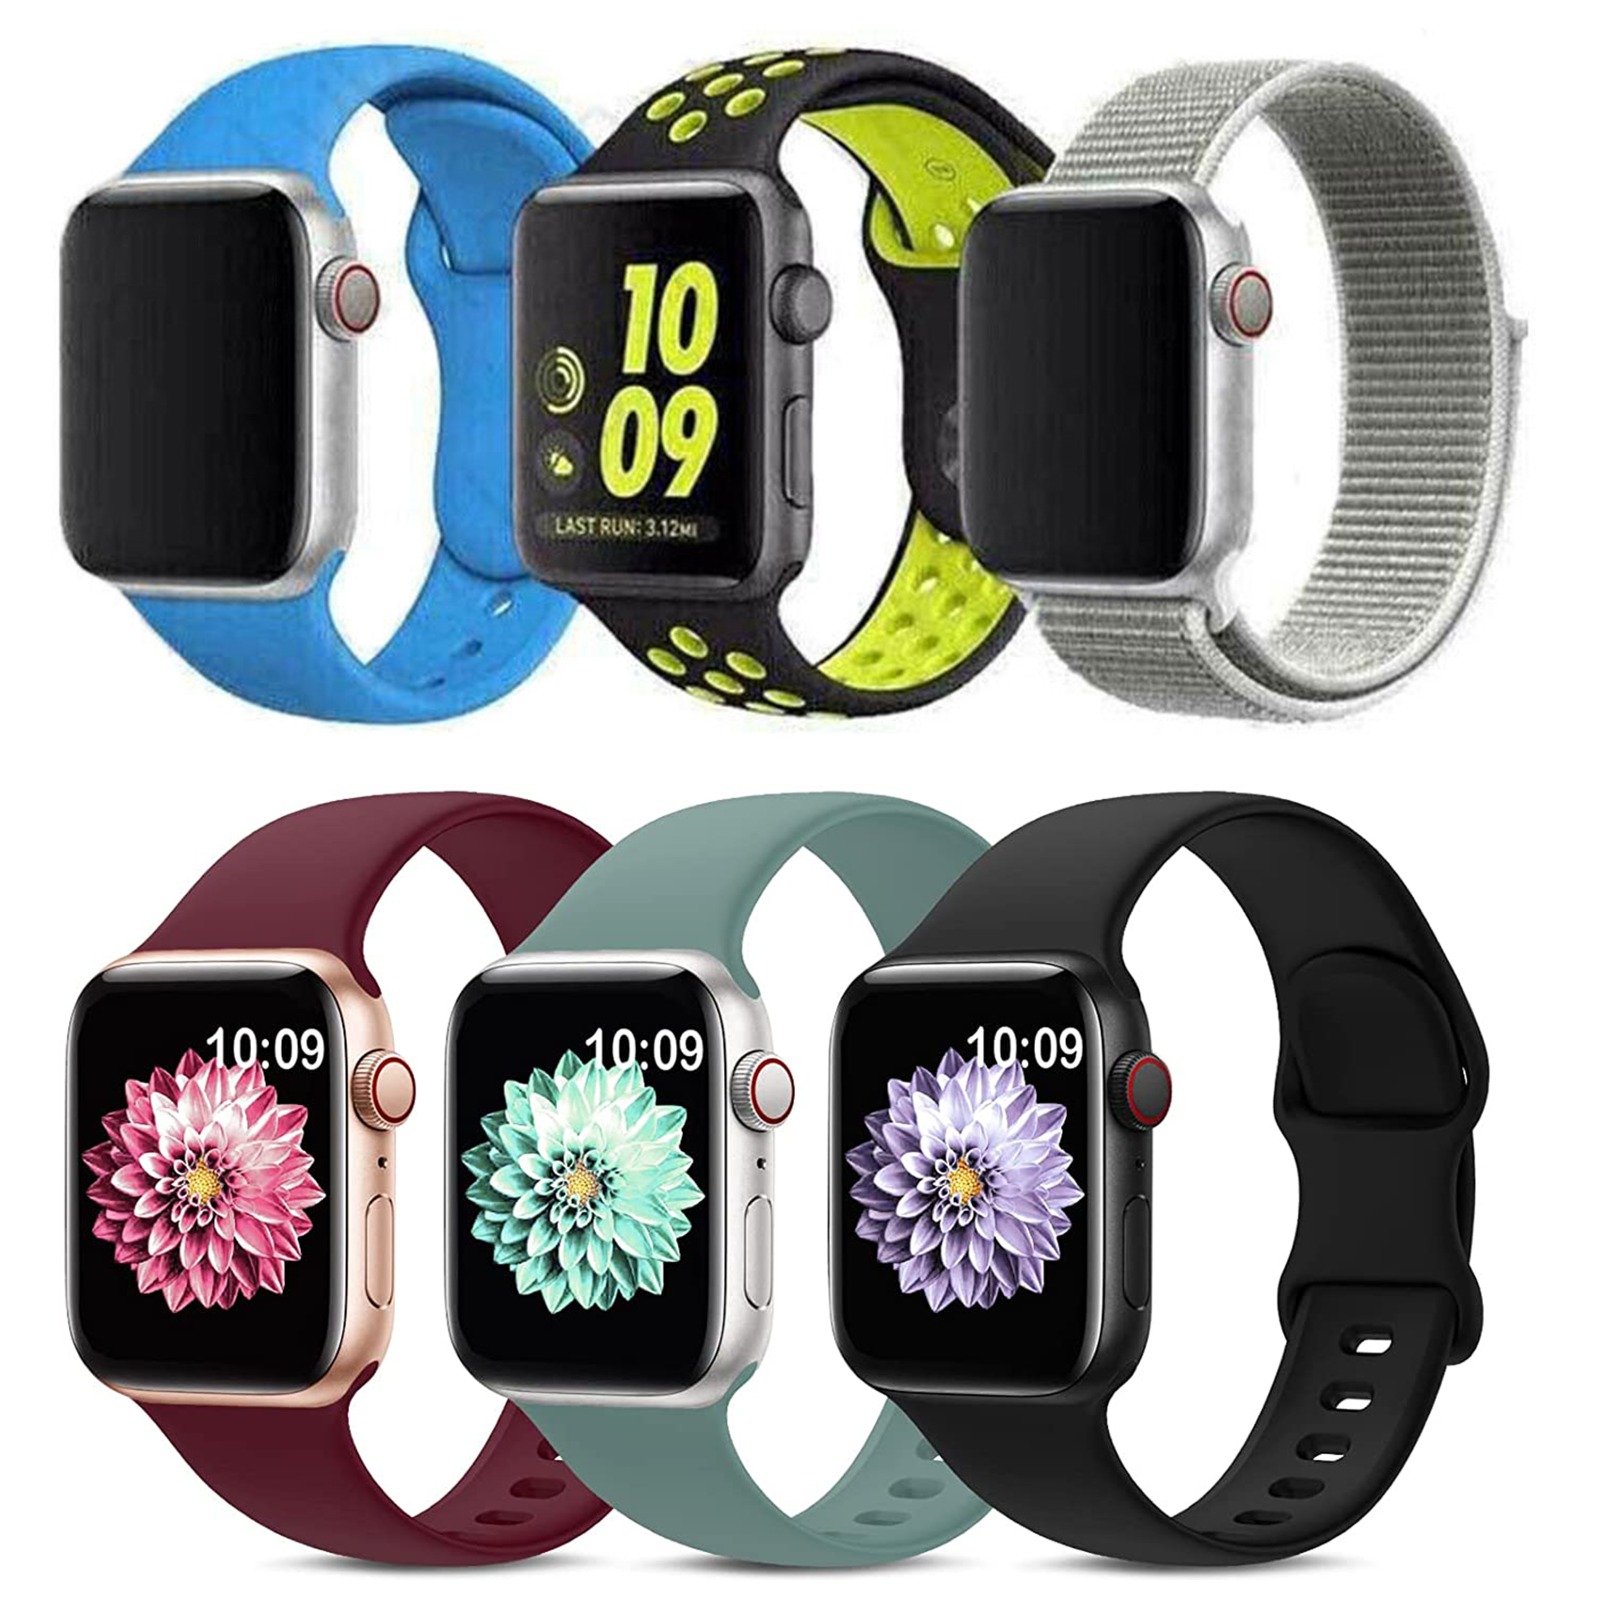 6 Pack Assorted Watch Bands for Apple Smartwatch  - $9.99